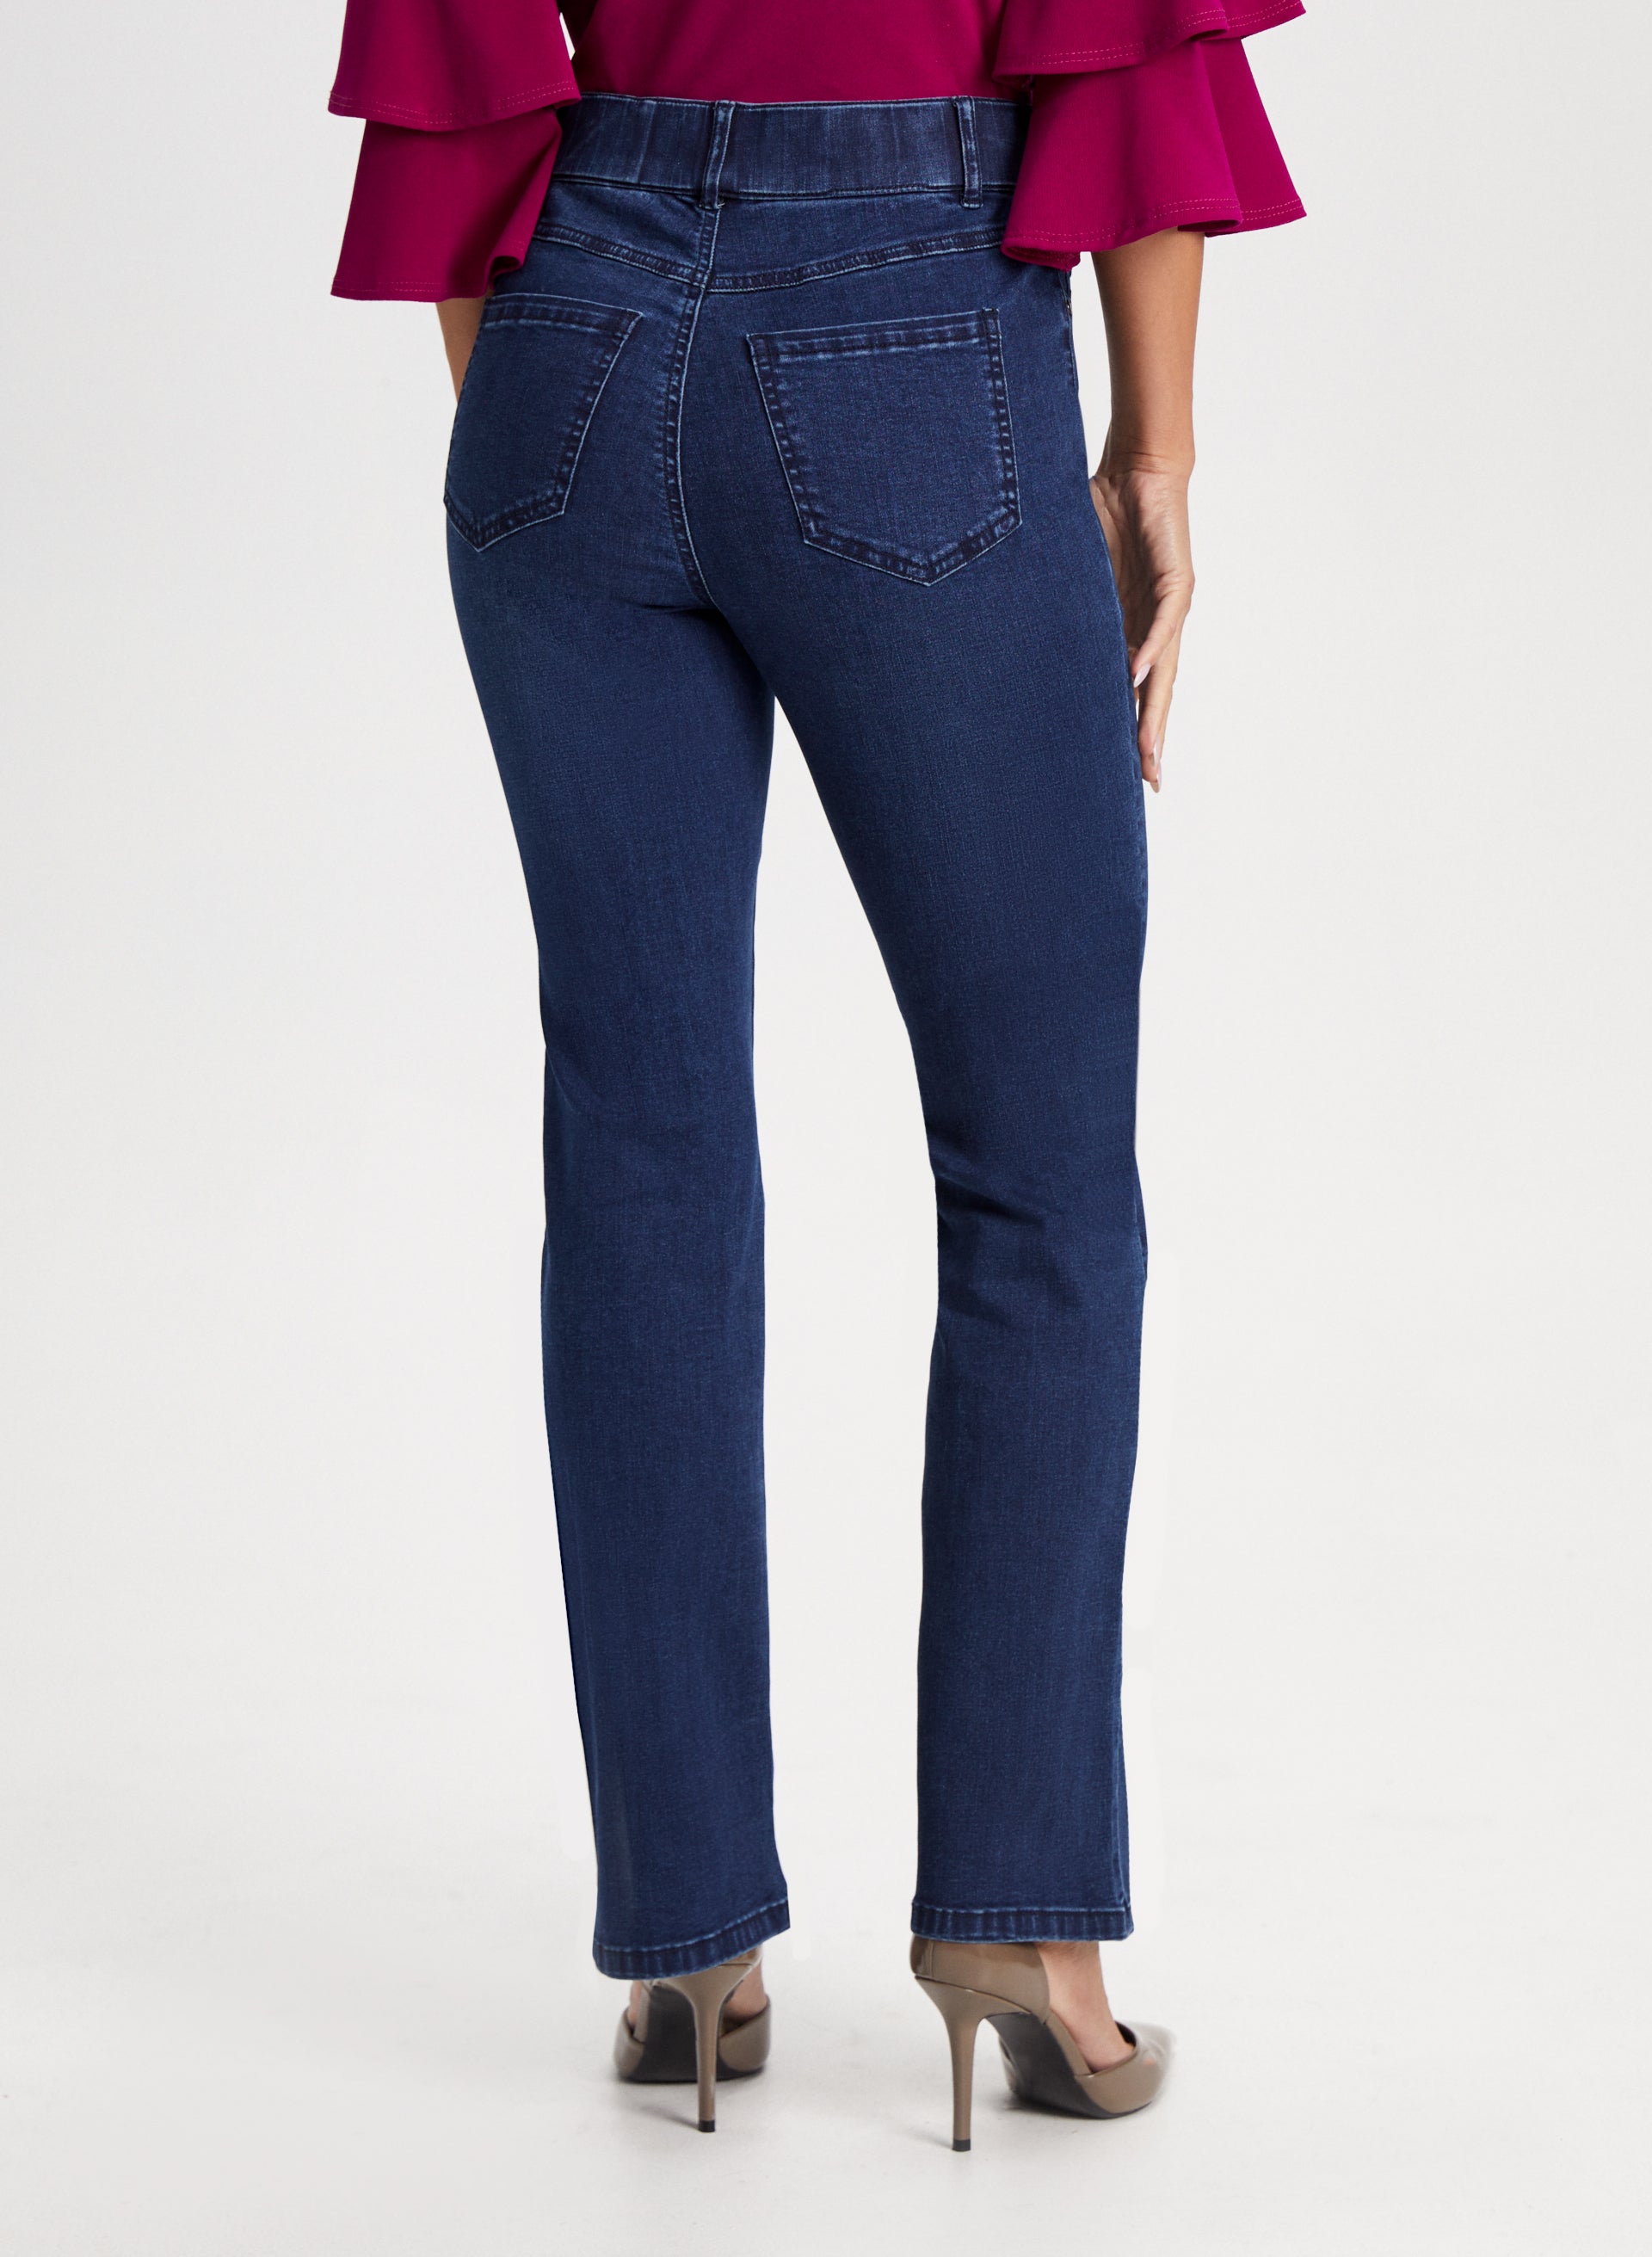 Soft Surroundings, Pants & Jumpsuits, Soft Surroundings Womens Jeans Small  Petite Blue Supremely Soft Pull On Bootcut